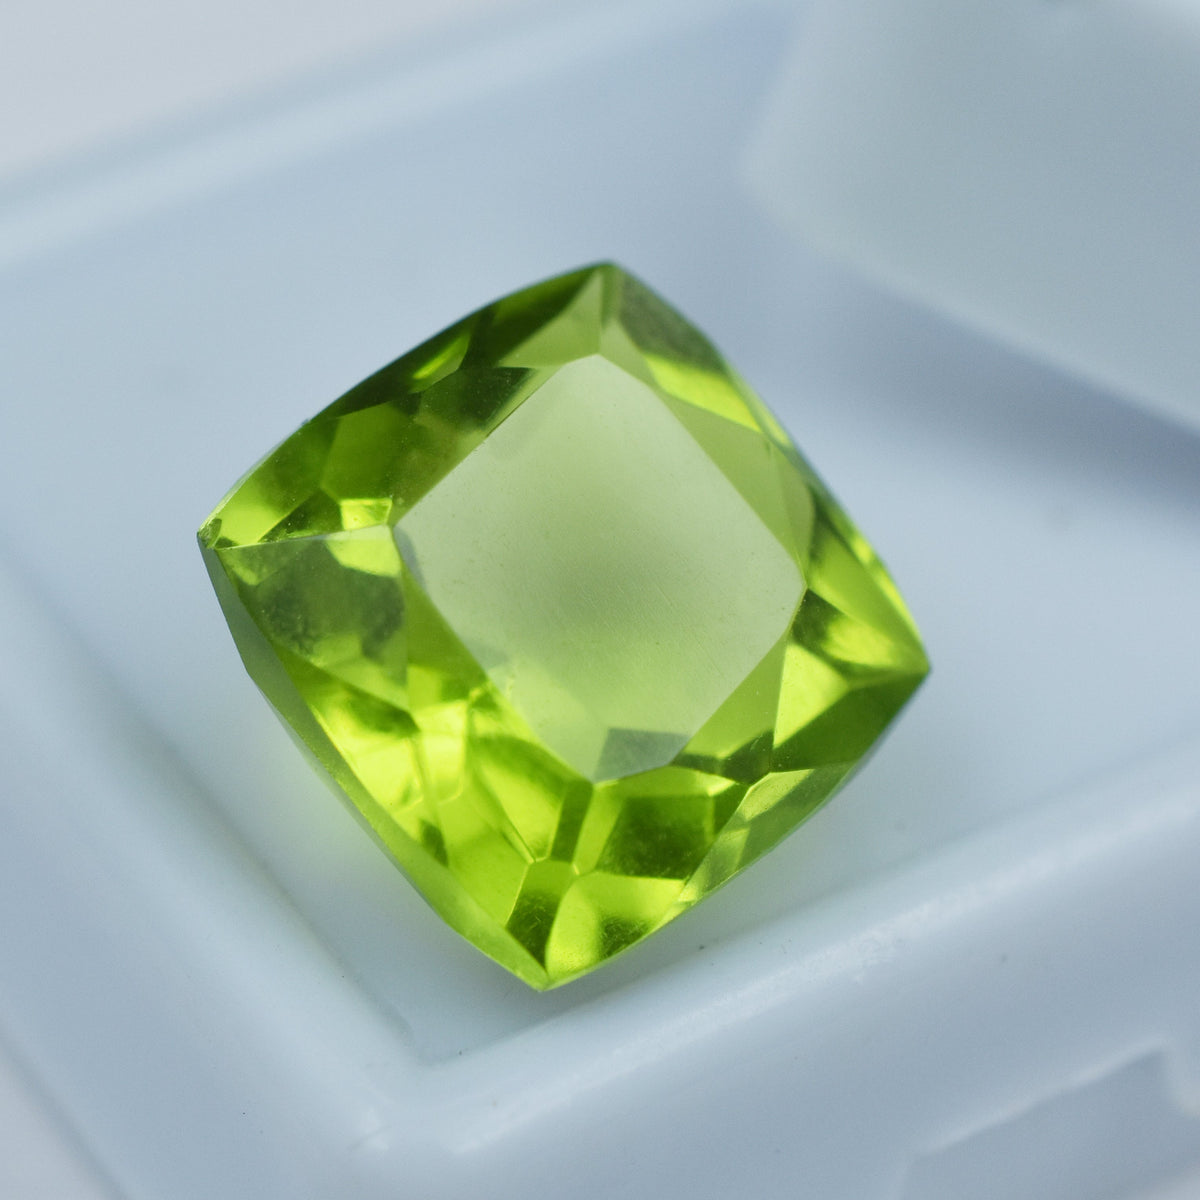 Natural Peridot Square Cushion Cut Peridot Green 10.23 Carat CERTIFIED Ring Size Peridot Ring Size Loose Gemstone August Birthstone Gemstone Best Gift -Free Delivery Free Gift